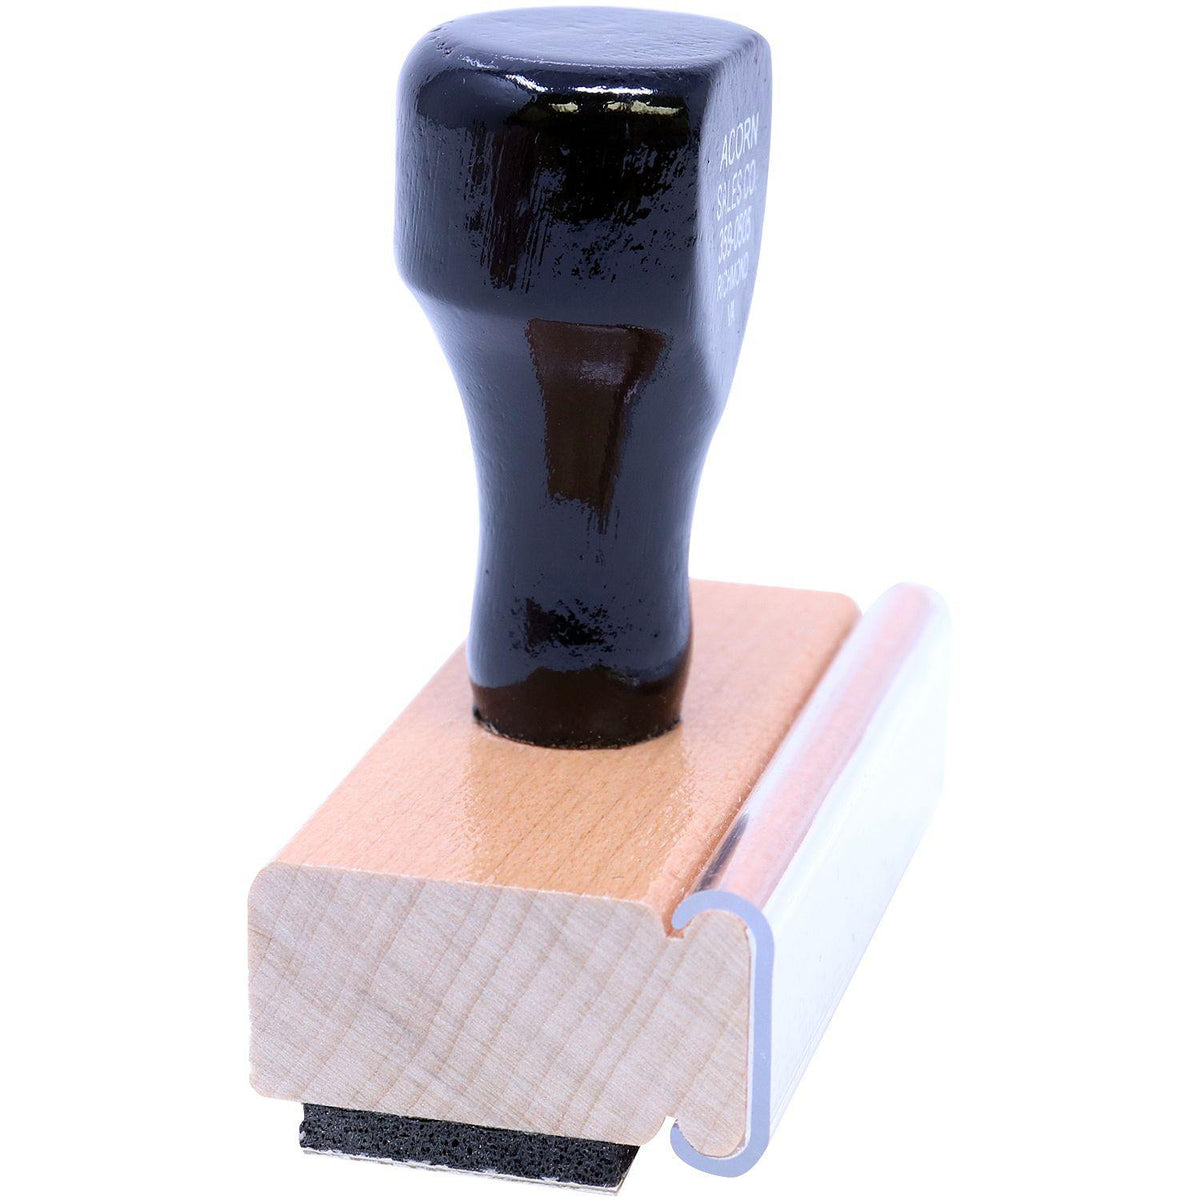 Side View of Validated Rubber Stamp at an Angle